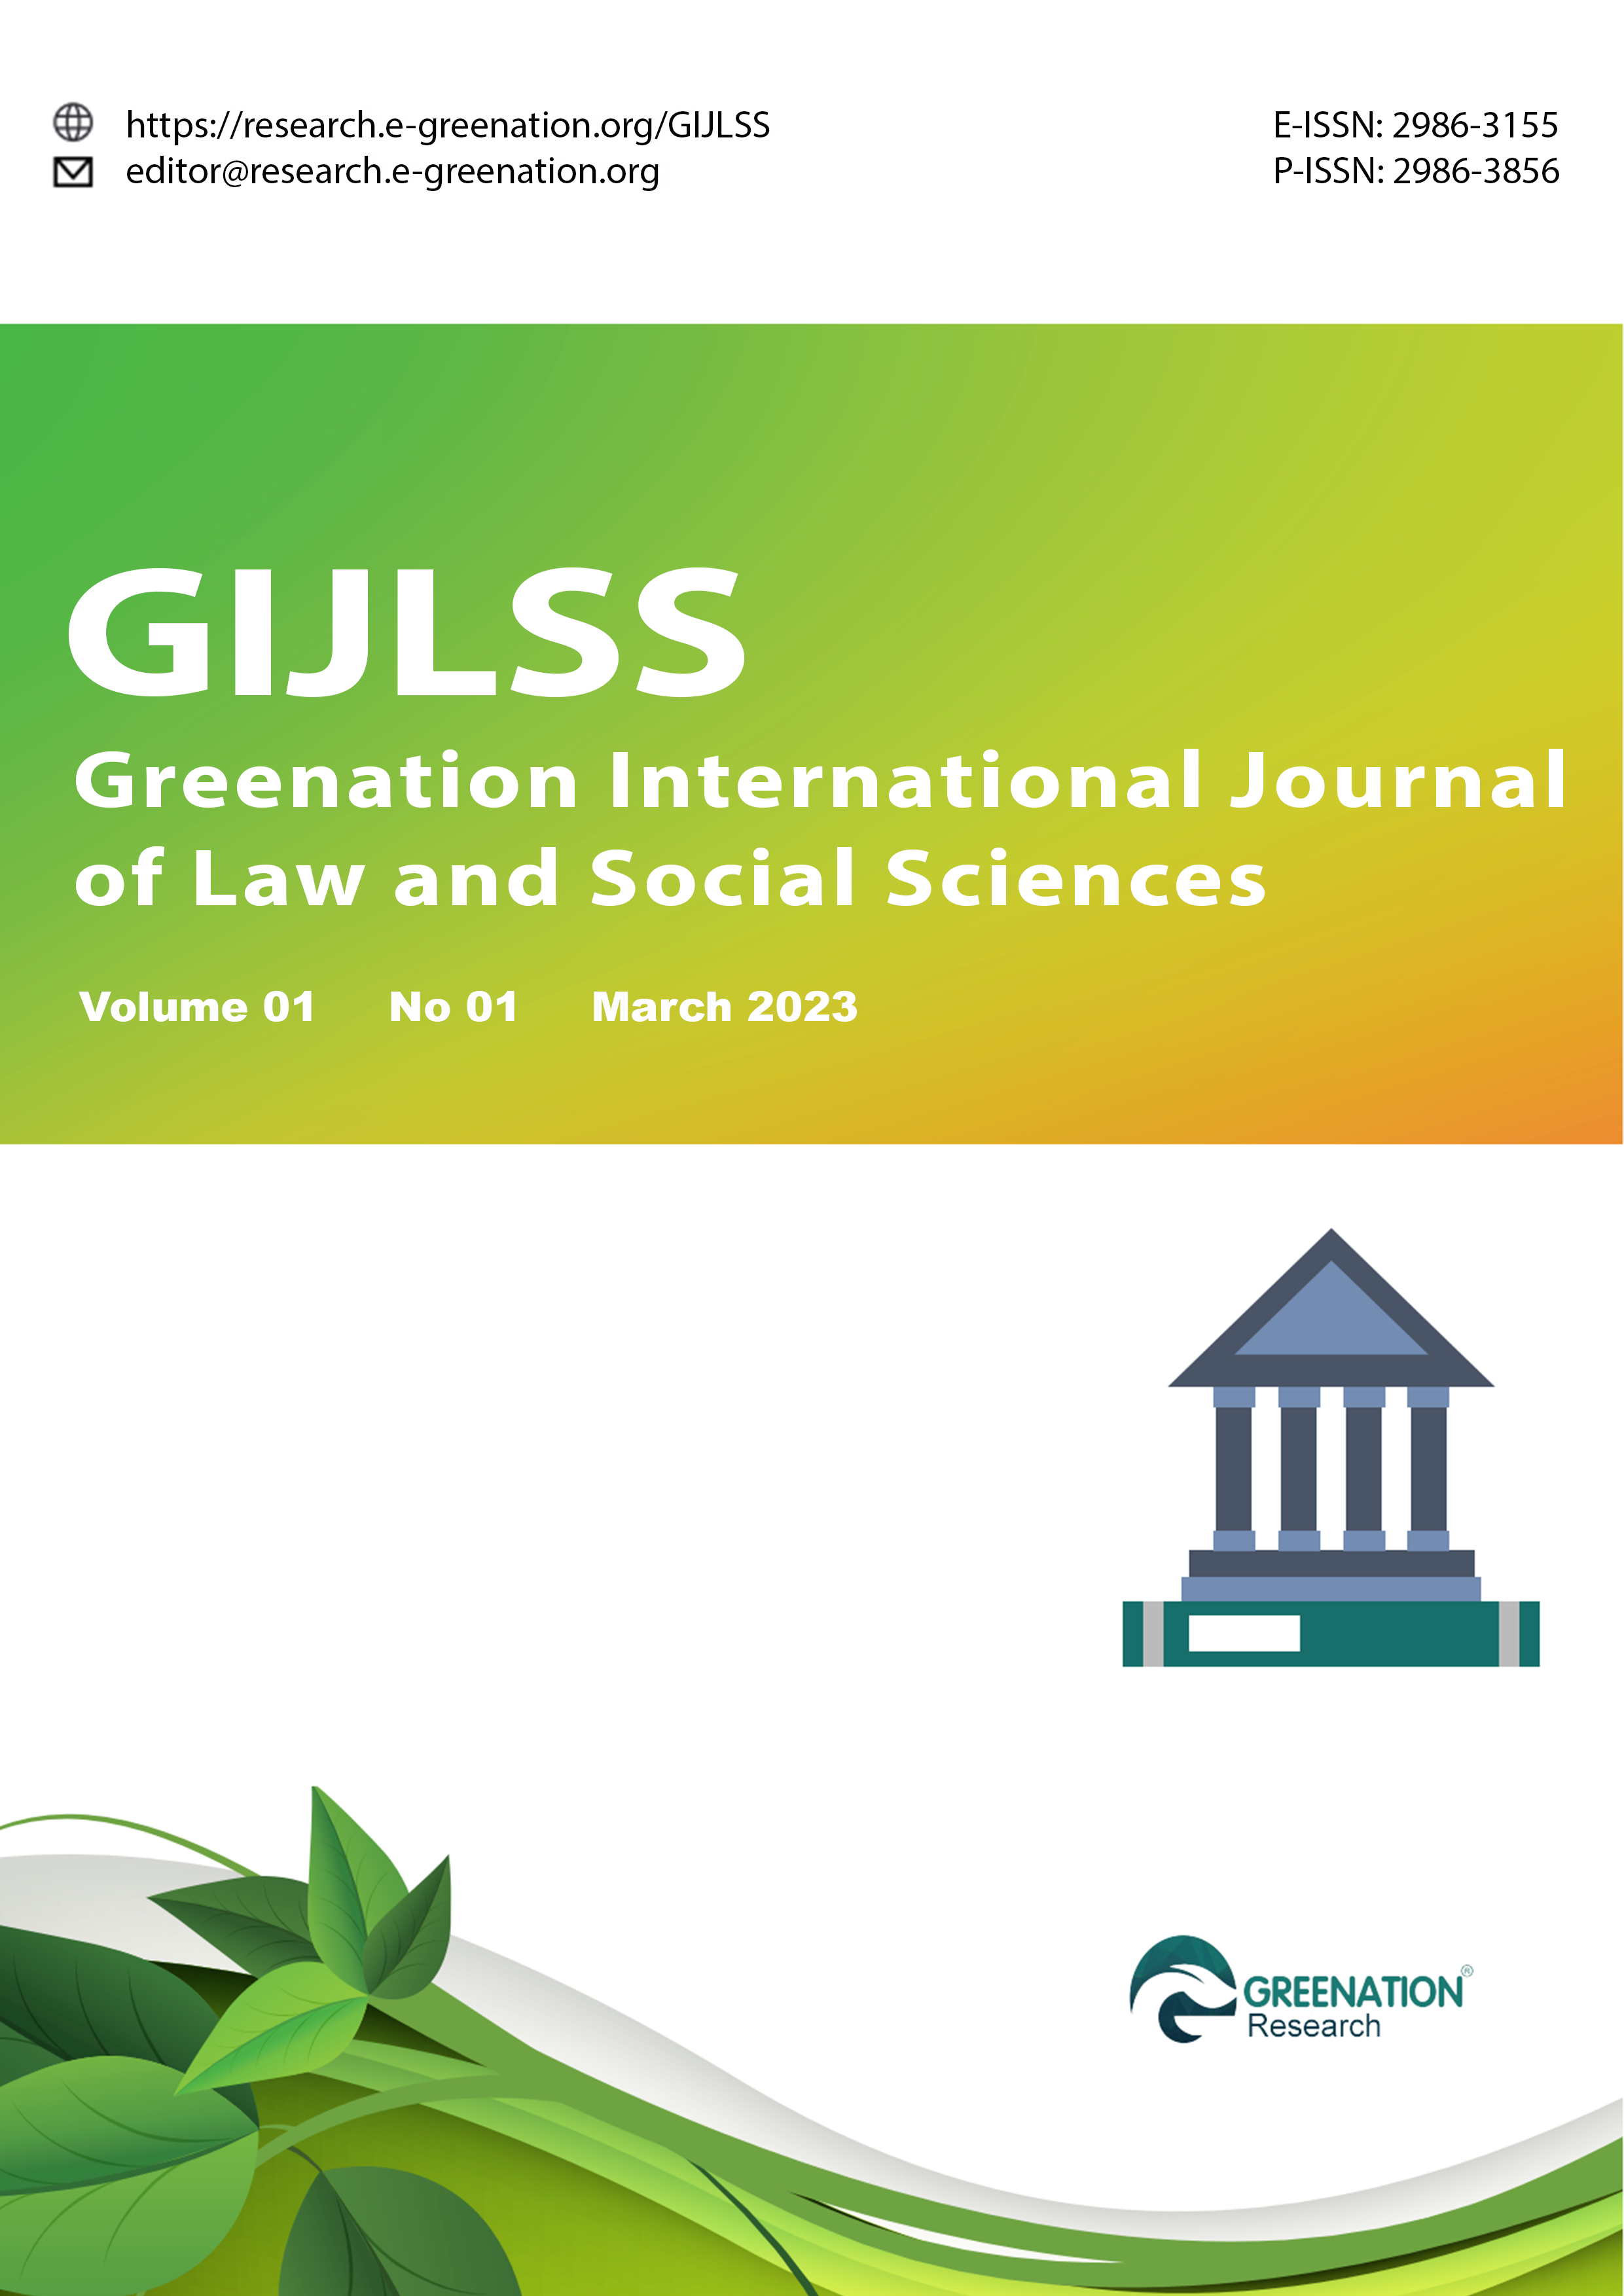 					View Vol. 1 No. 1 (2023): (GIJLSS) Greenation International Journal of Law and Social Sciences (March 2023)
				